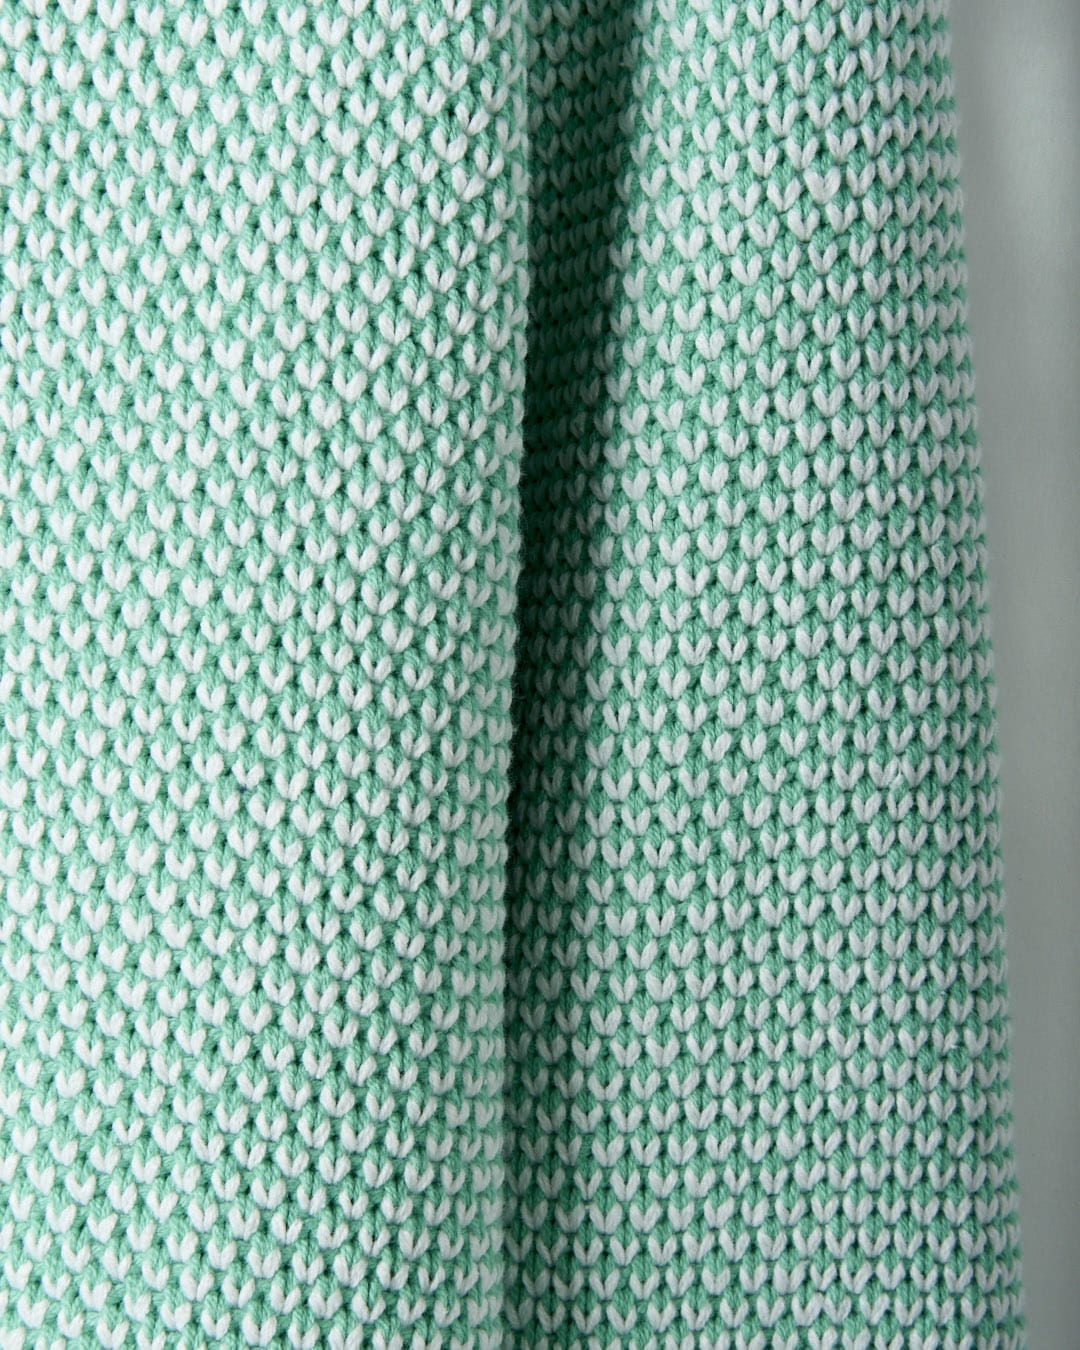 A close-up image of green and white knit fabric with a textured, repeating pattern. This textured knit design is not only visually appealing but also machine washable for easy care. The Poppy - Womens Knitted Pop Hoodie - Green by Saltrock embodies these qualities perfectly.